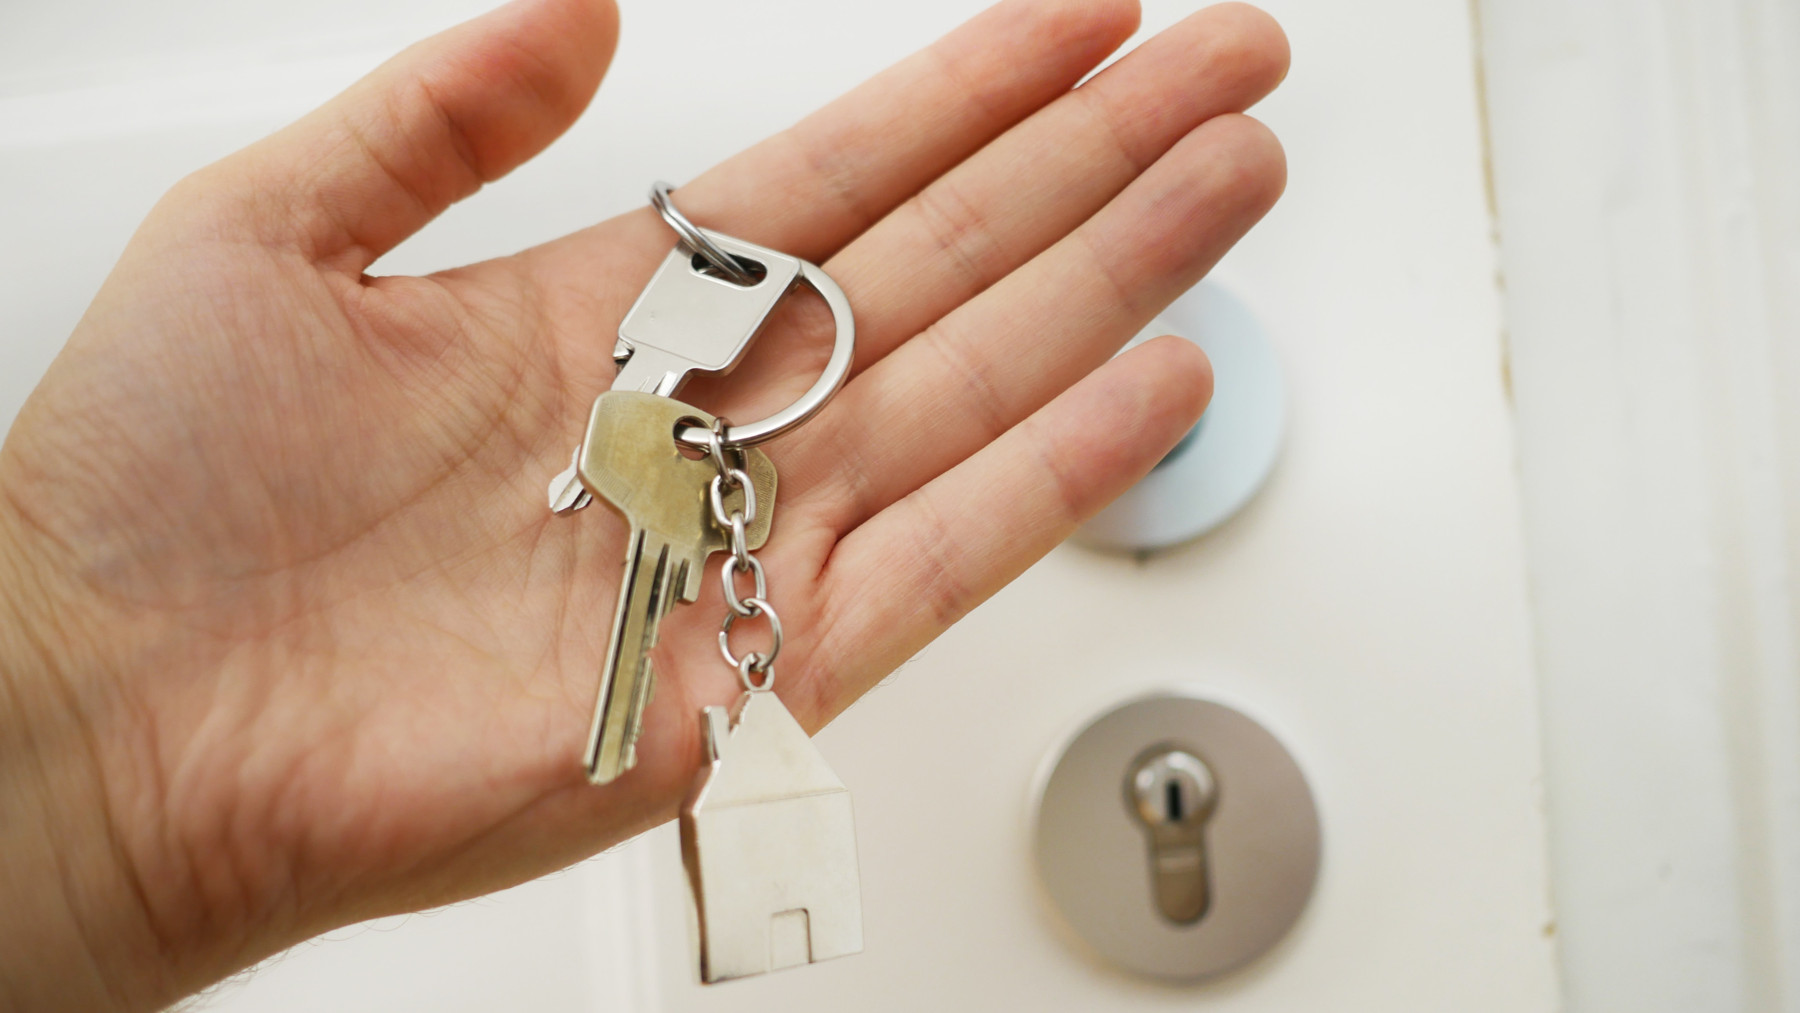 Hiring a San Diego Locksmith? Here’s Why to Always Check for License